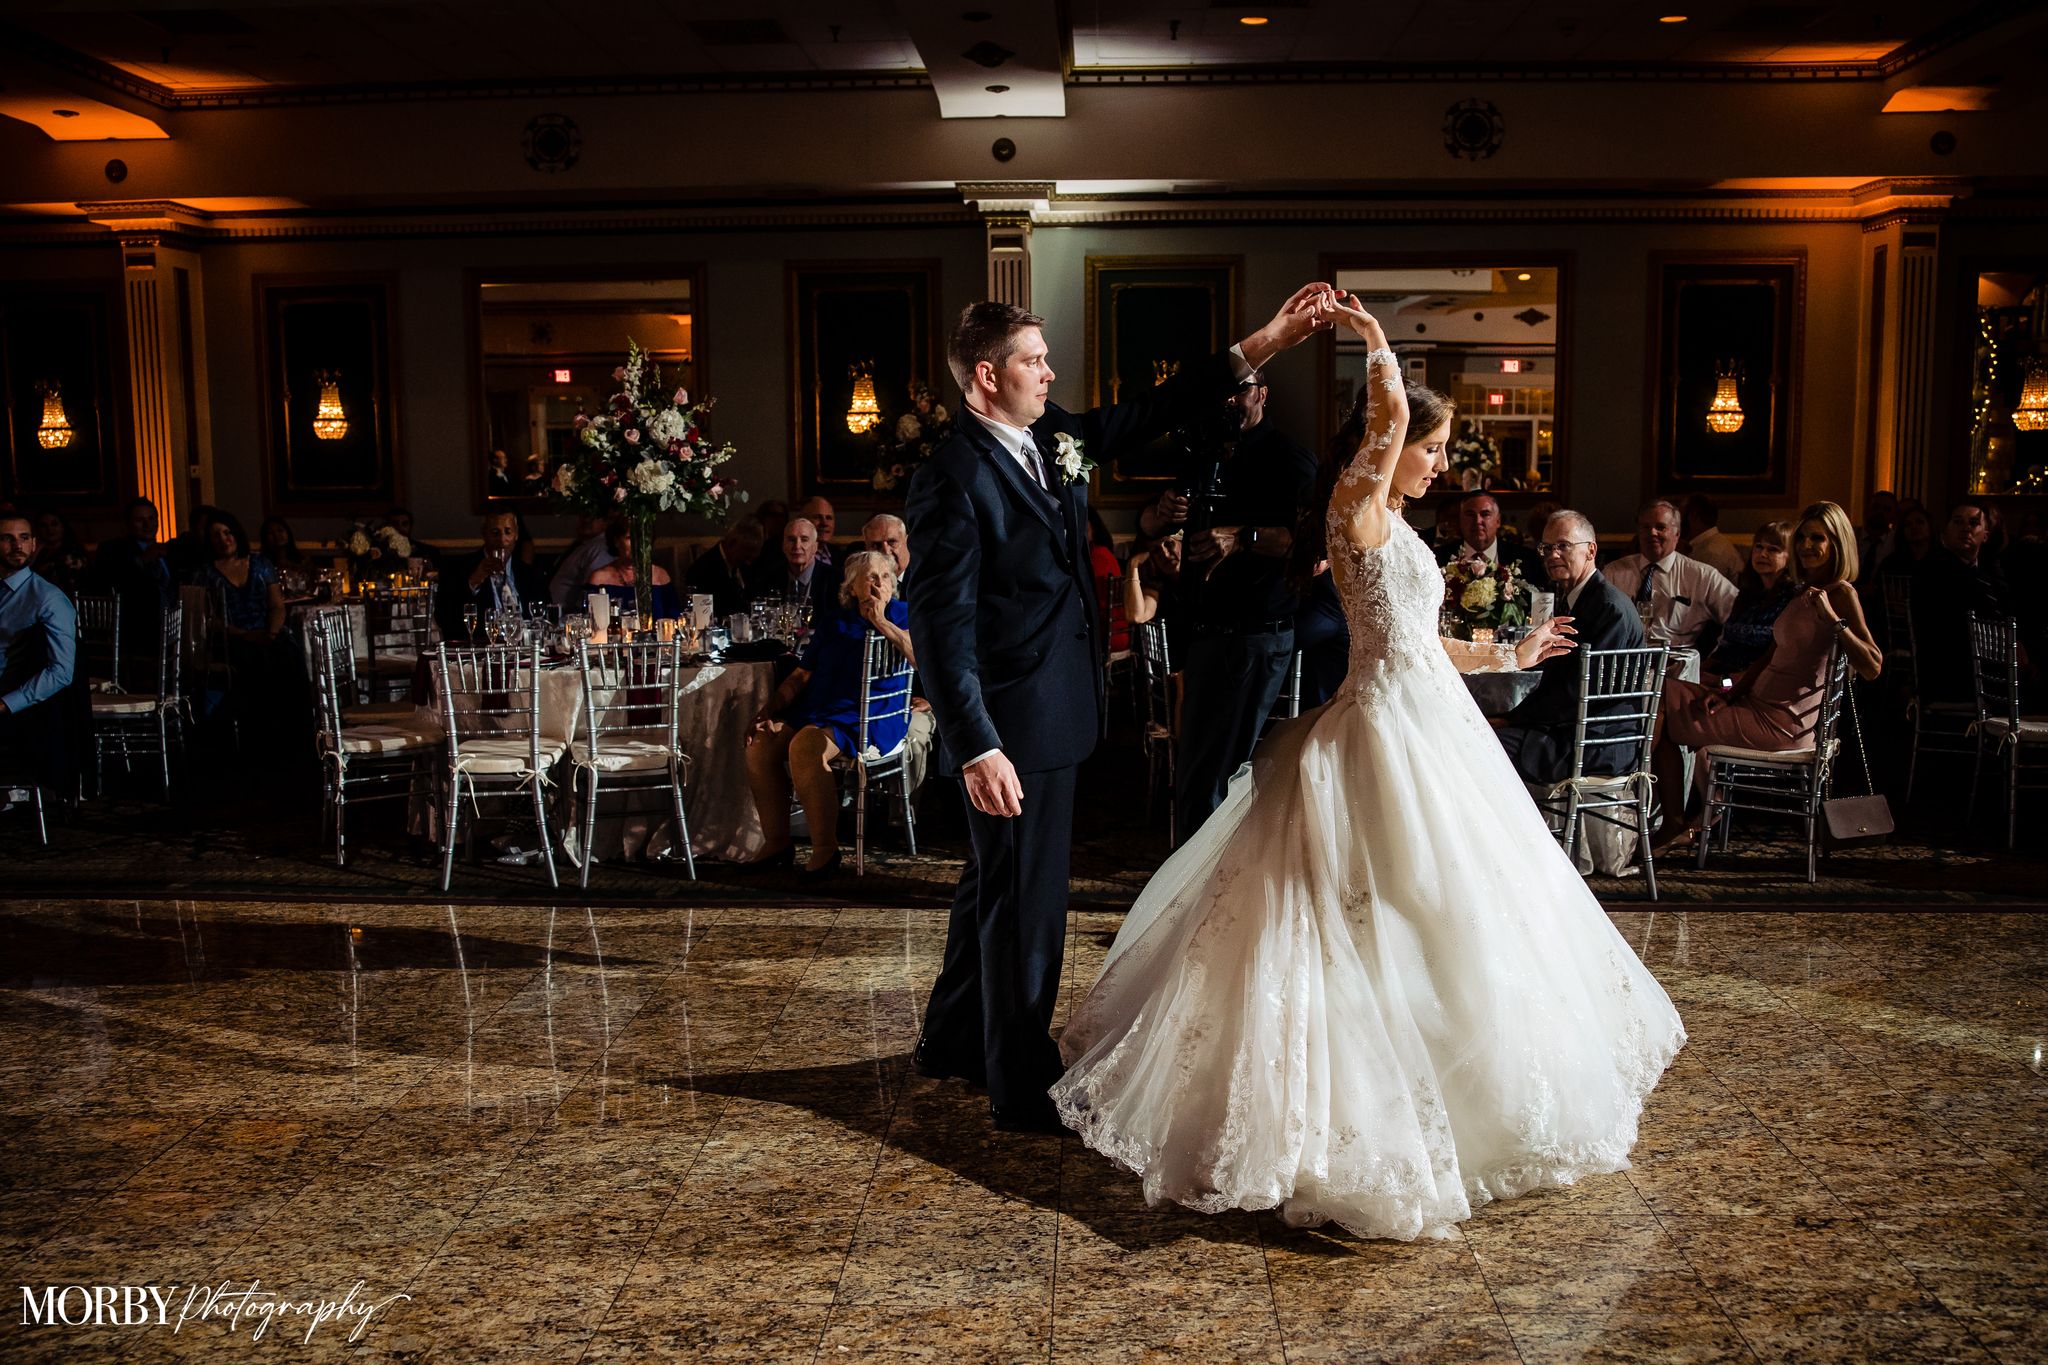 A Bride's First Dance with the Groom